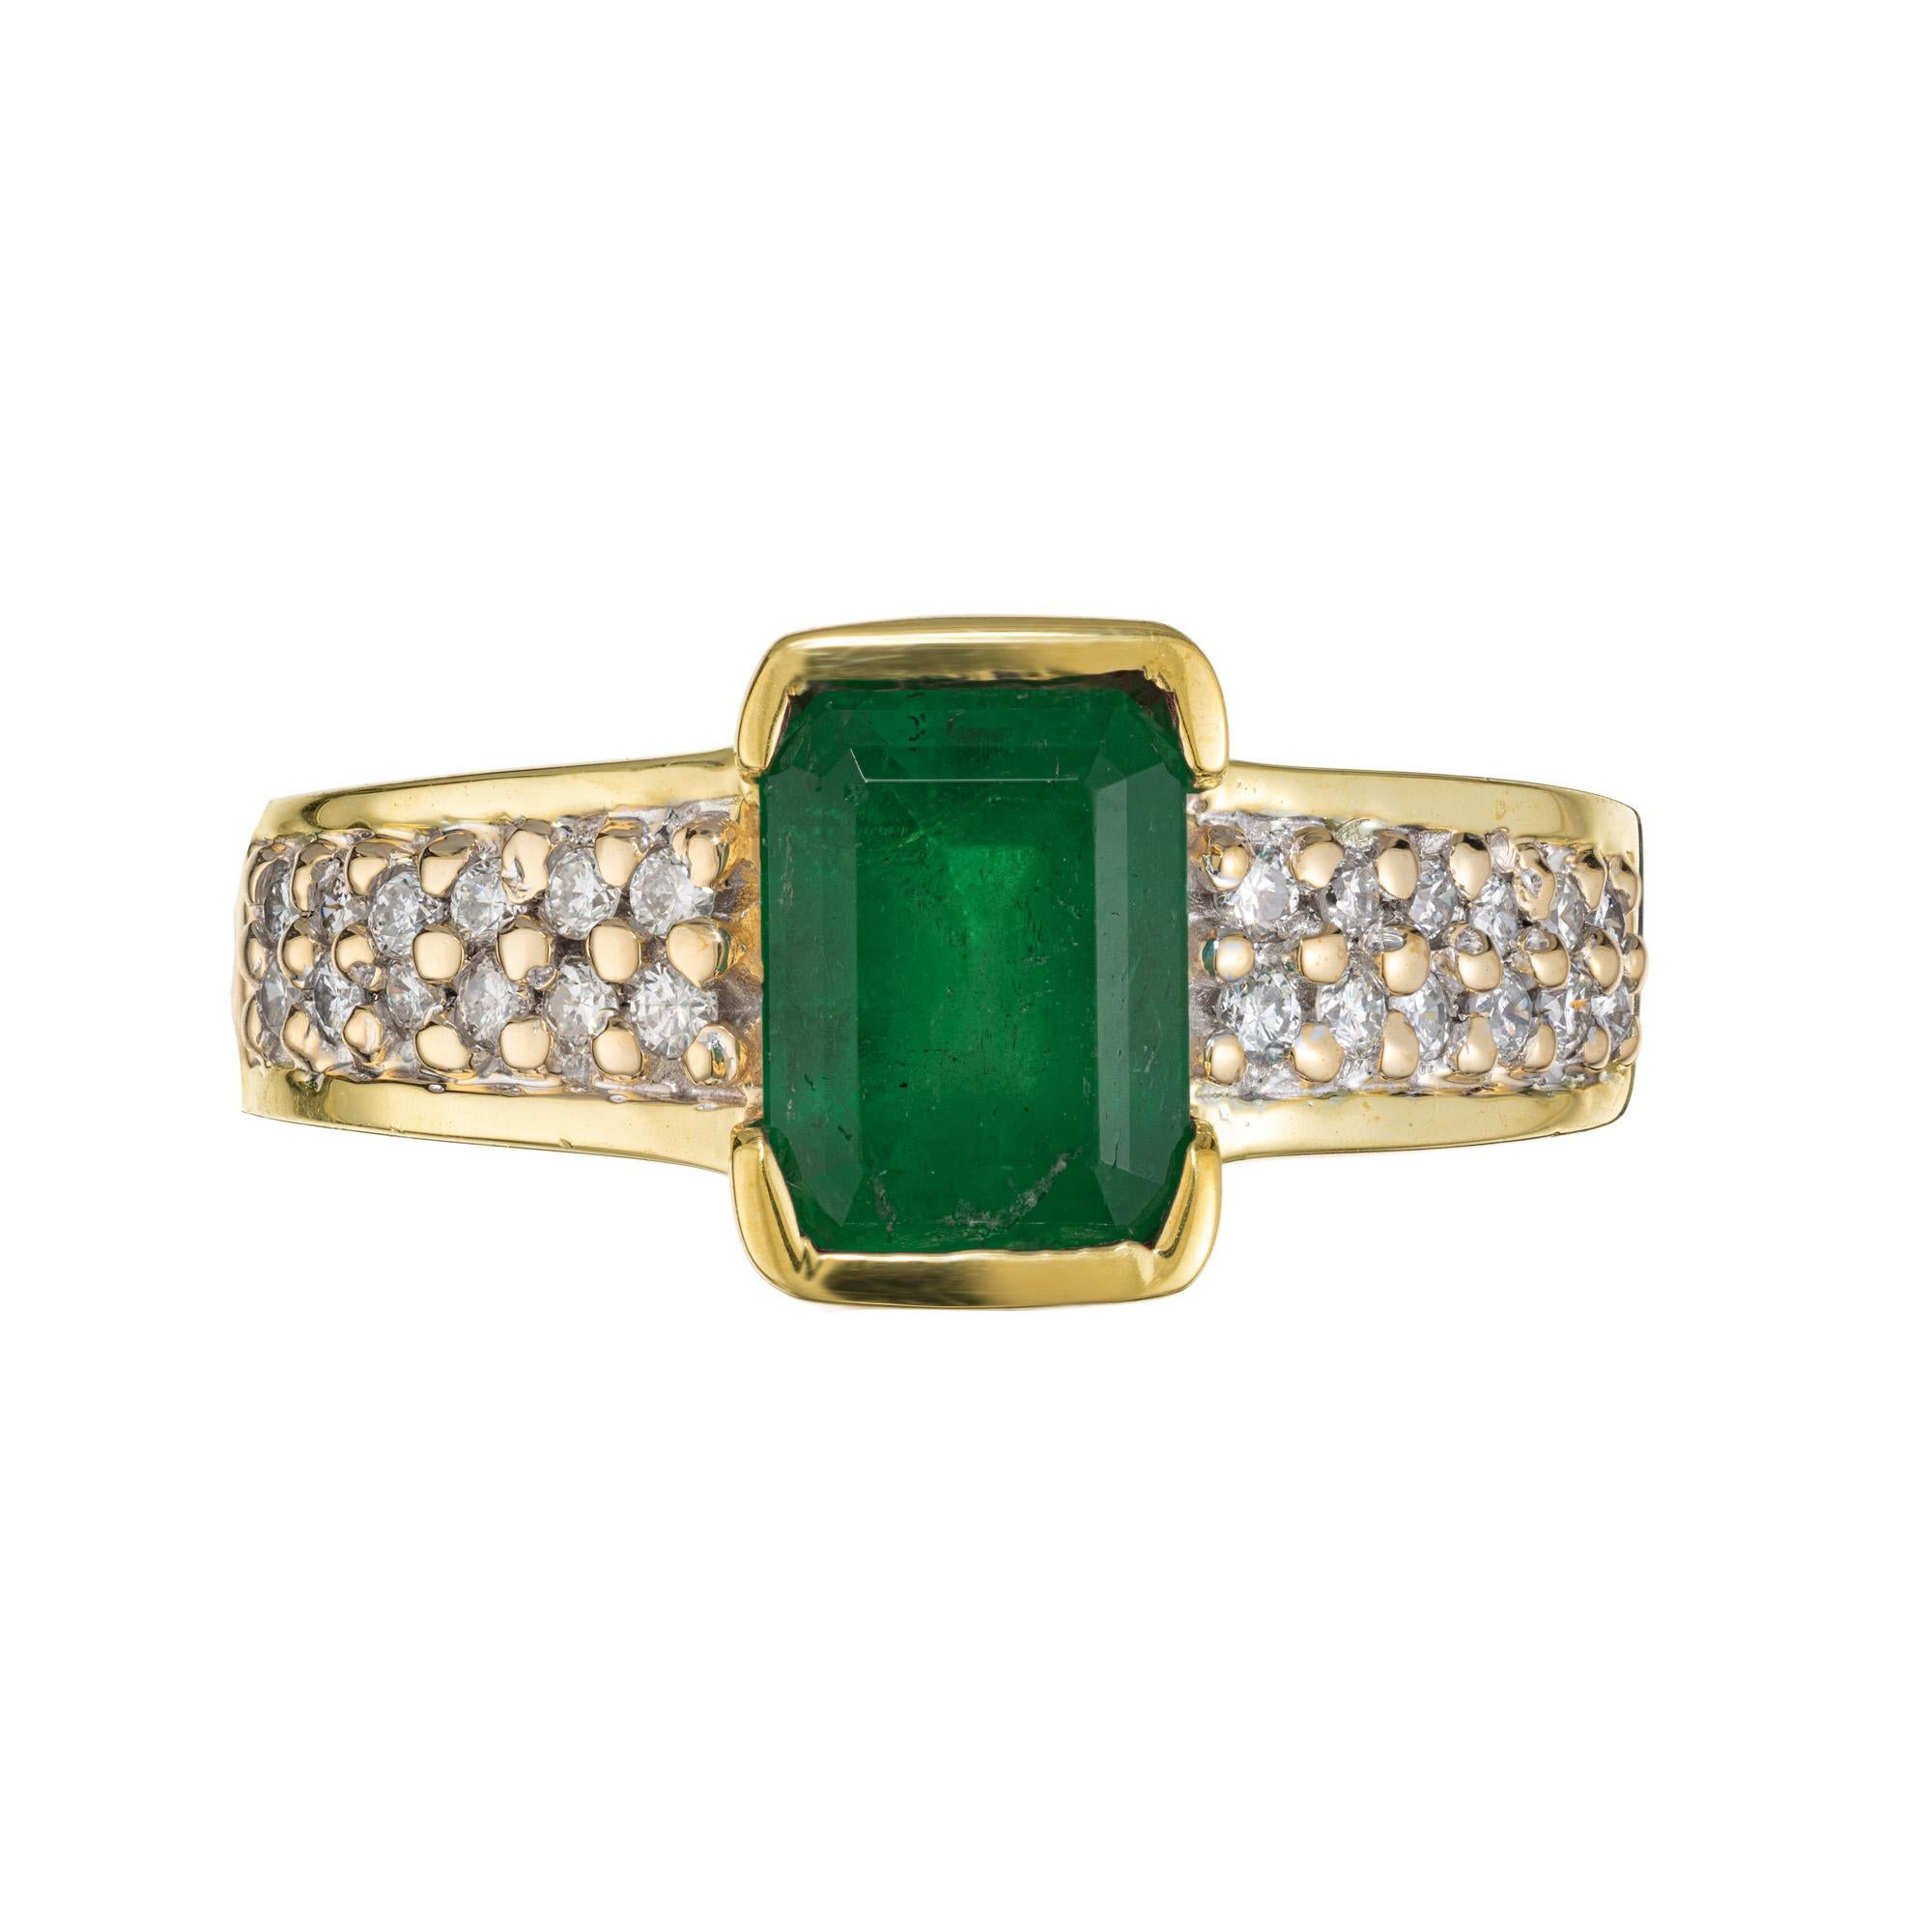 Green emerald and diamond engagement ring. GIA certified rich green octagonal cut 1.63ct emerald which is semi bezel set in a 14k yellow gold setting. Each shoulder has 2 rows of round brilliant cut diamonds. GIA certified this emerald as, natural